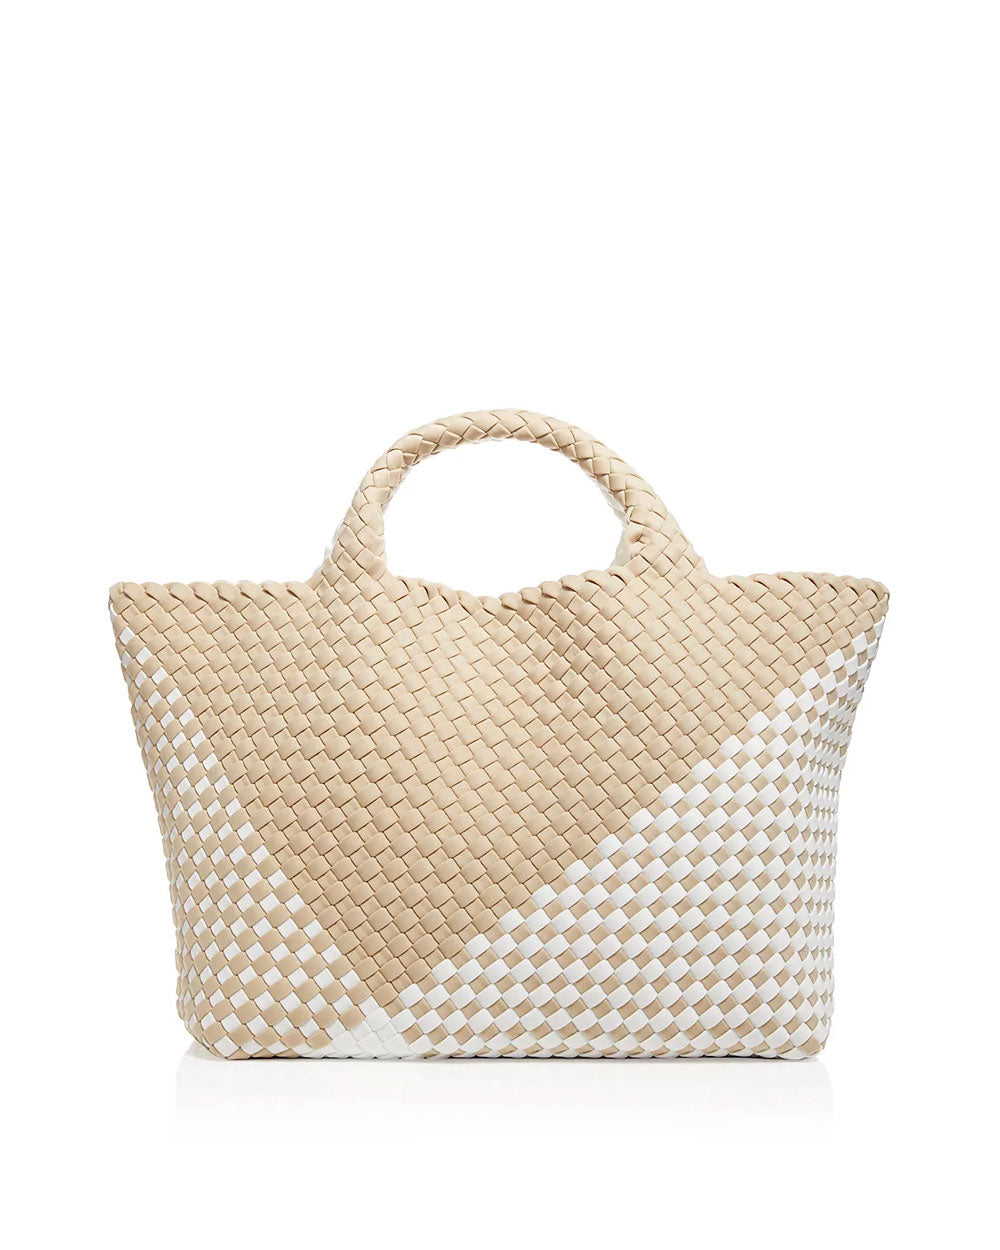 St. Barth's Woven Medium Tote in Anthena